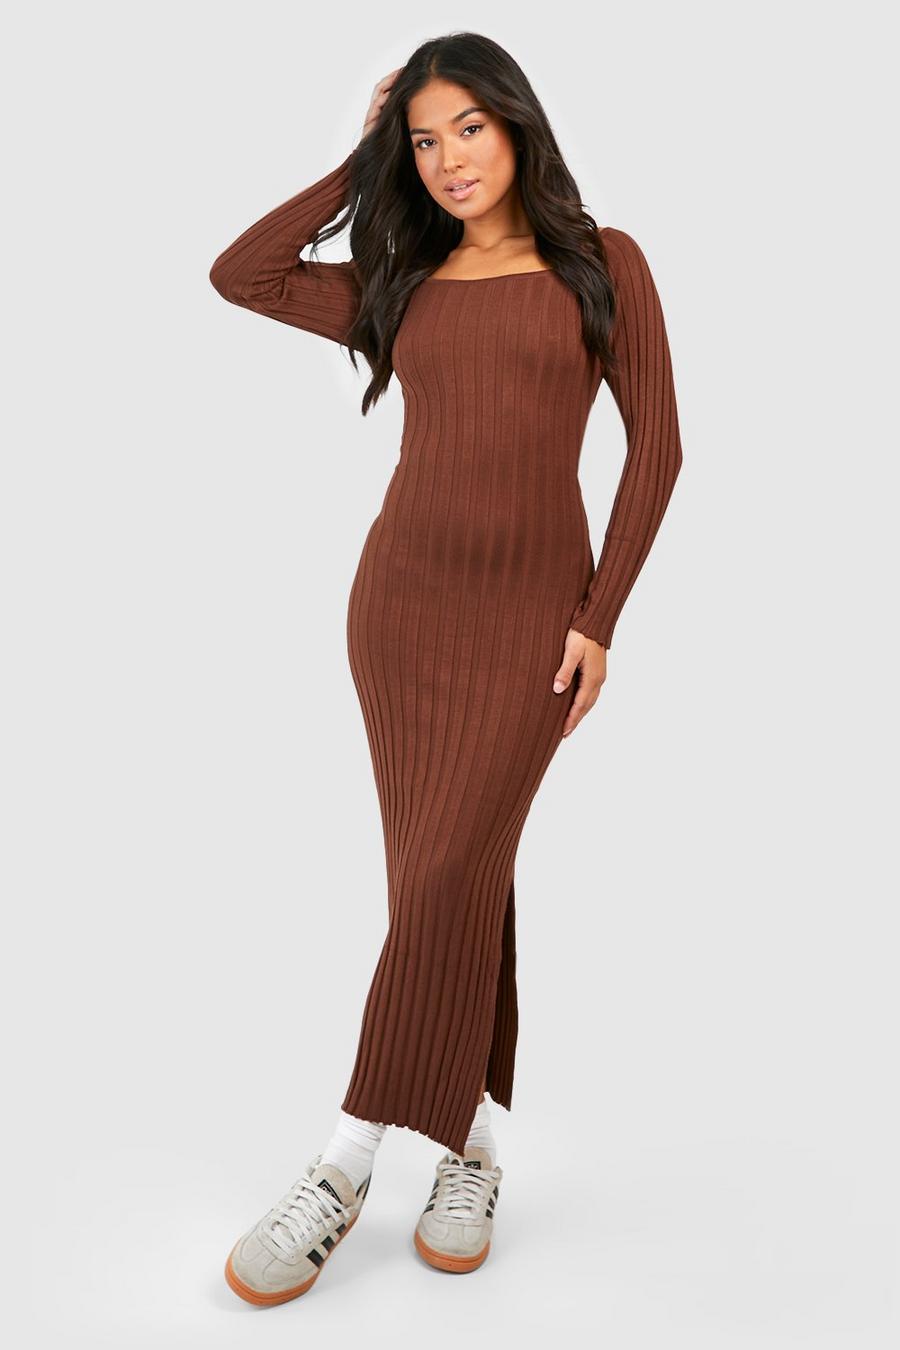 Chocolate brown Petite Off The Shoulder Rib Knit Maxi Dress 